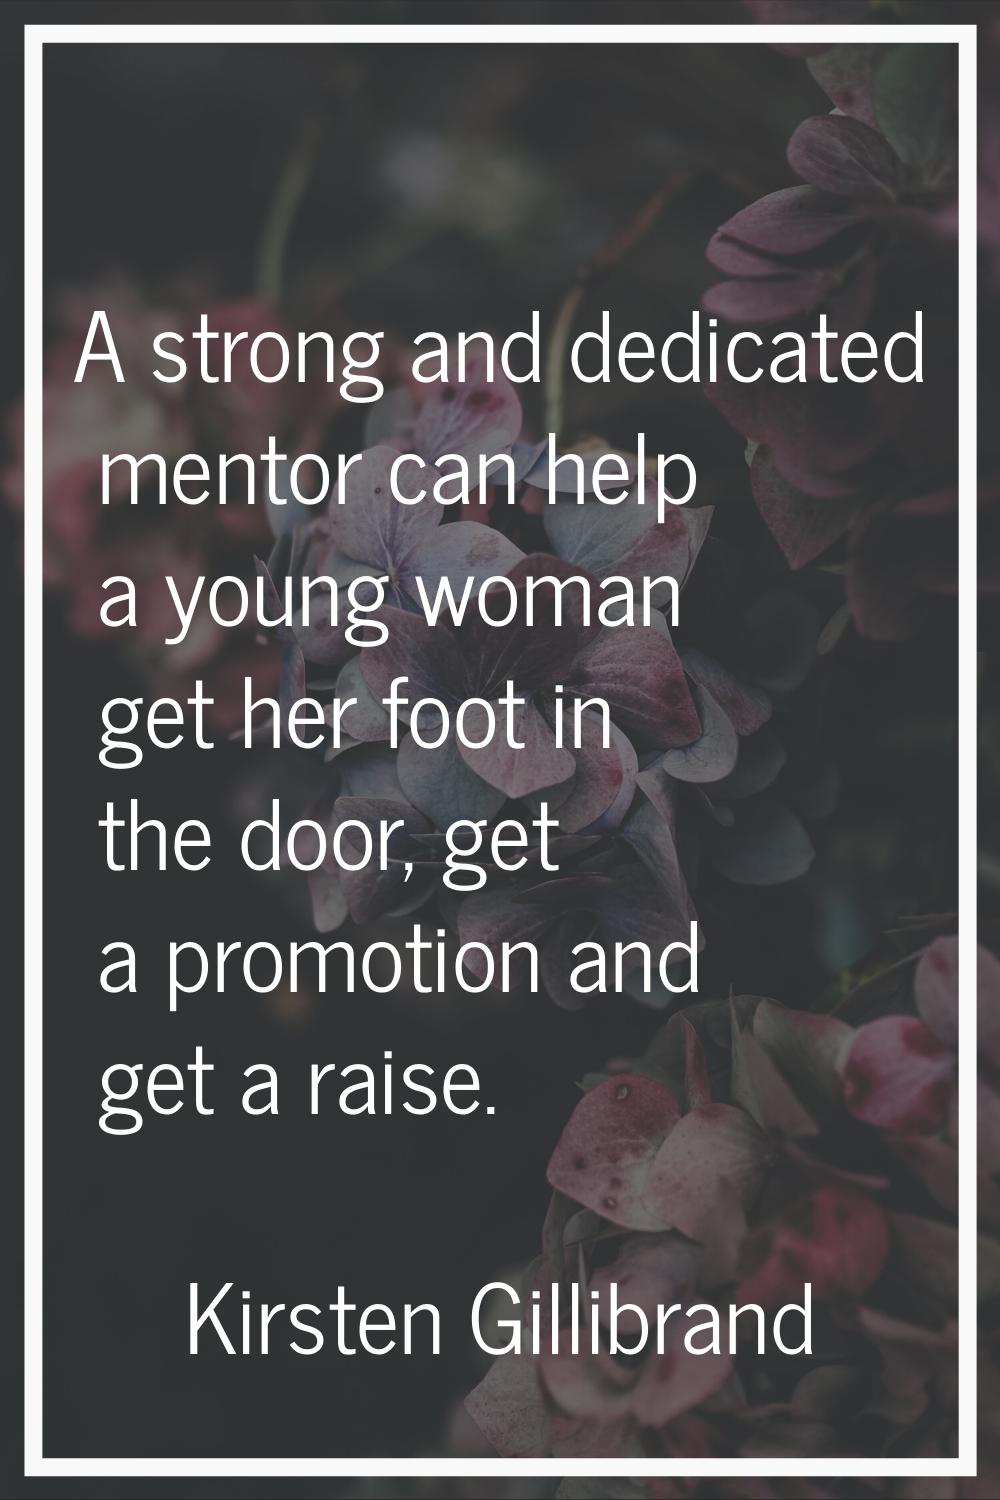 A strong and dedicated mentor can help a young woman get her foot in the door, get a promotion and 